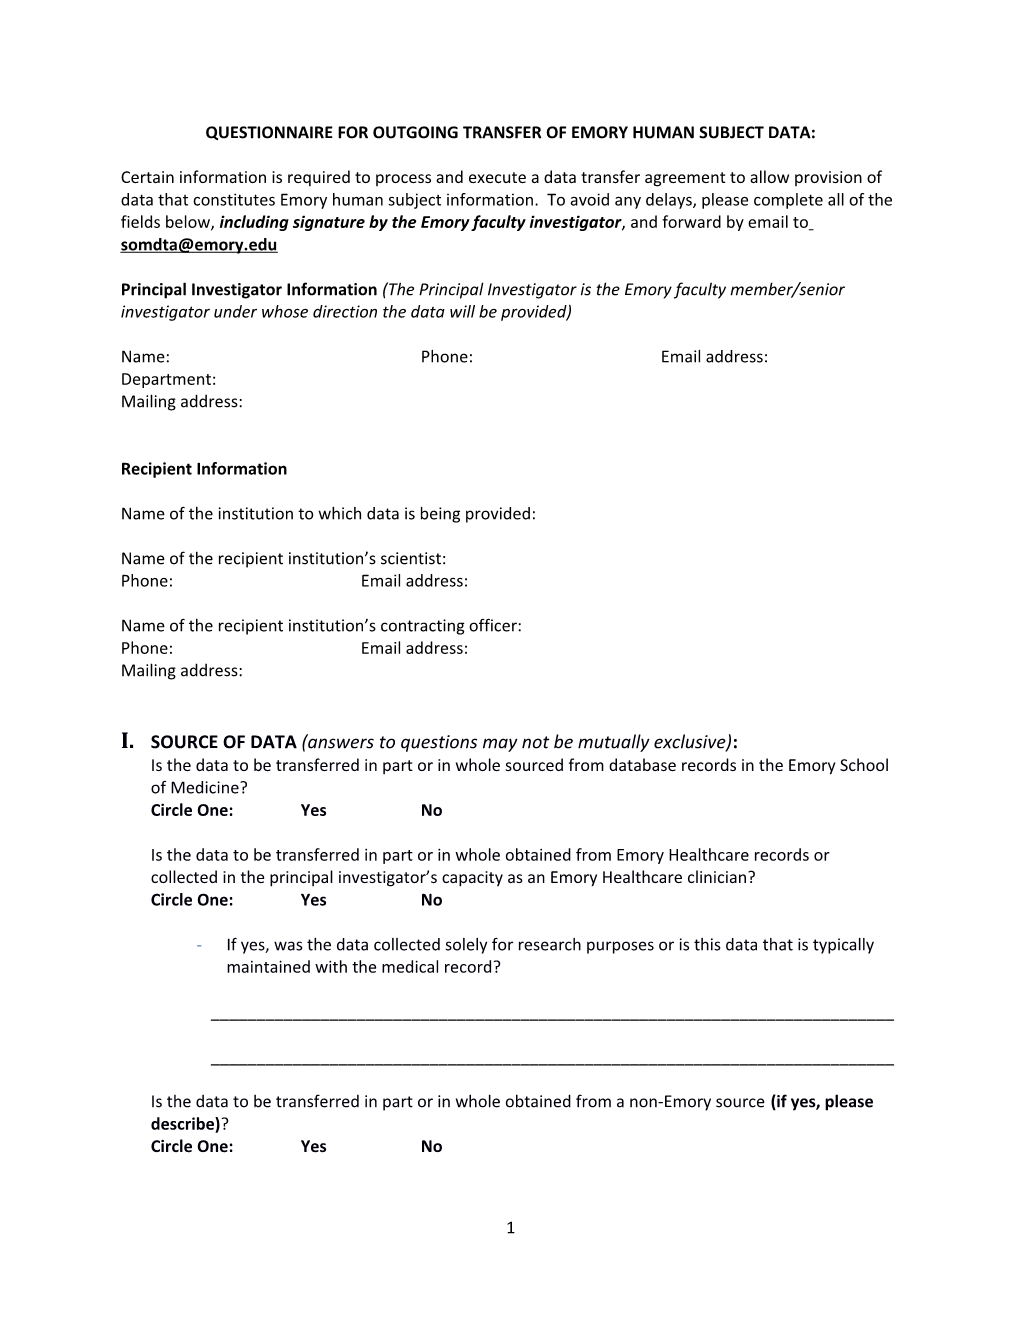 Questionnaire for Outgoing Transfer of Emory Human Subject Data